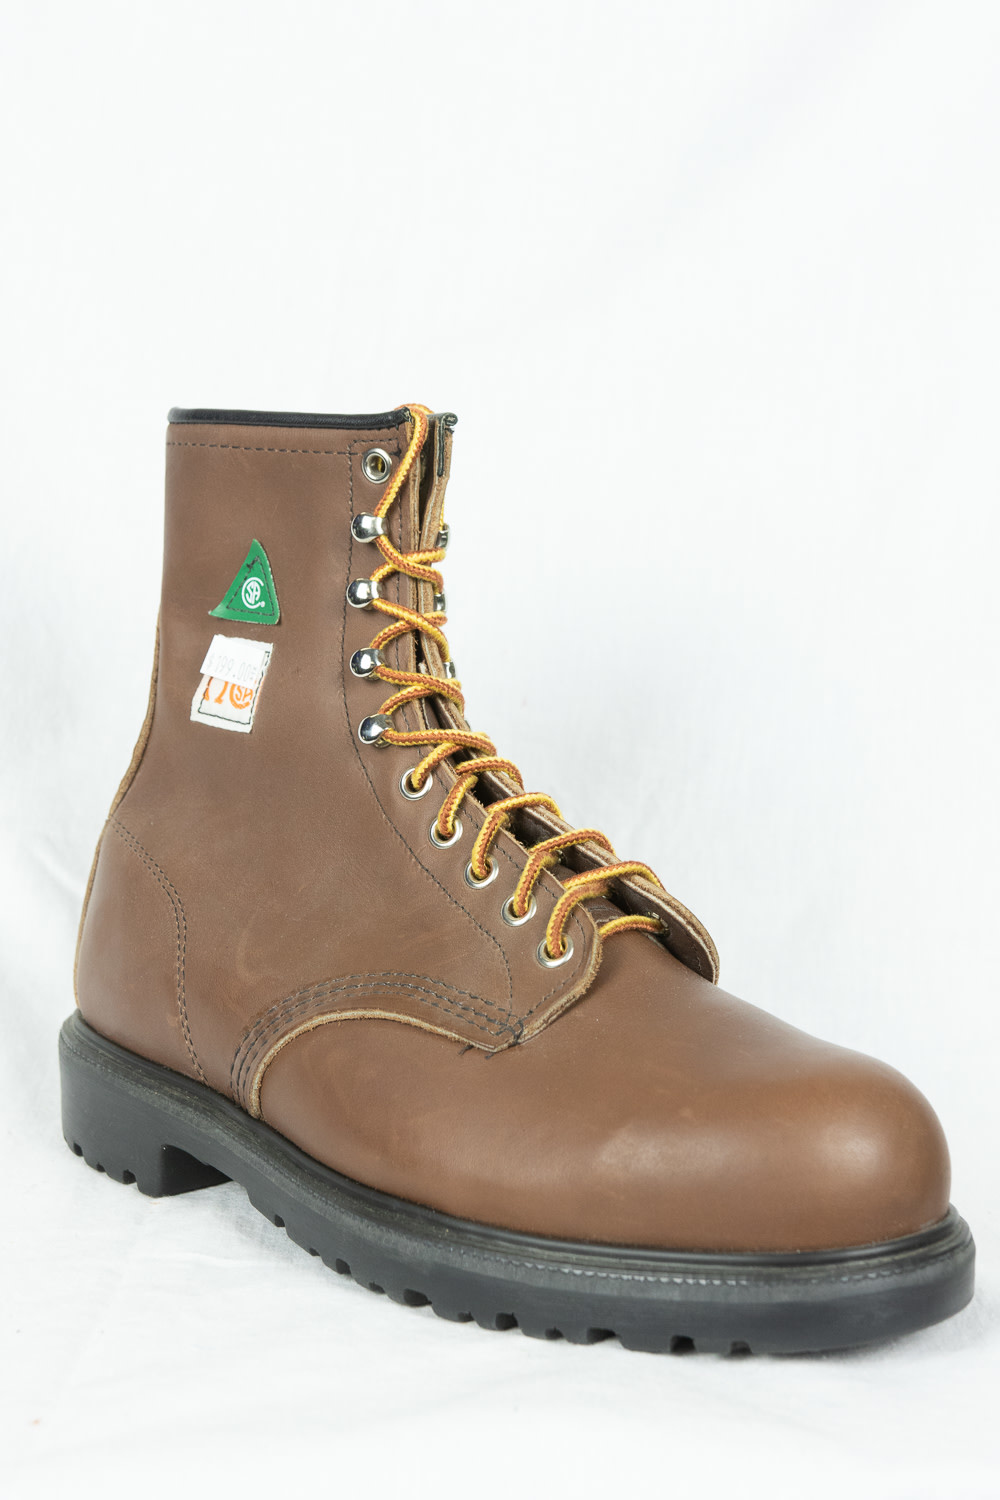 Red Wing Boots Steel Toe Men's ANSI Z41 